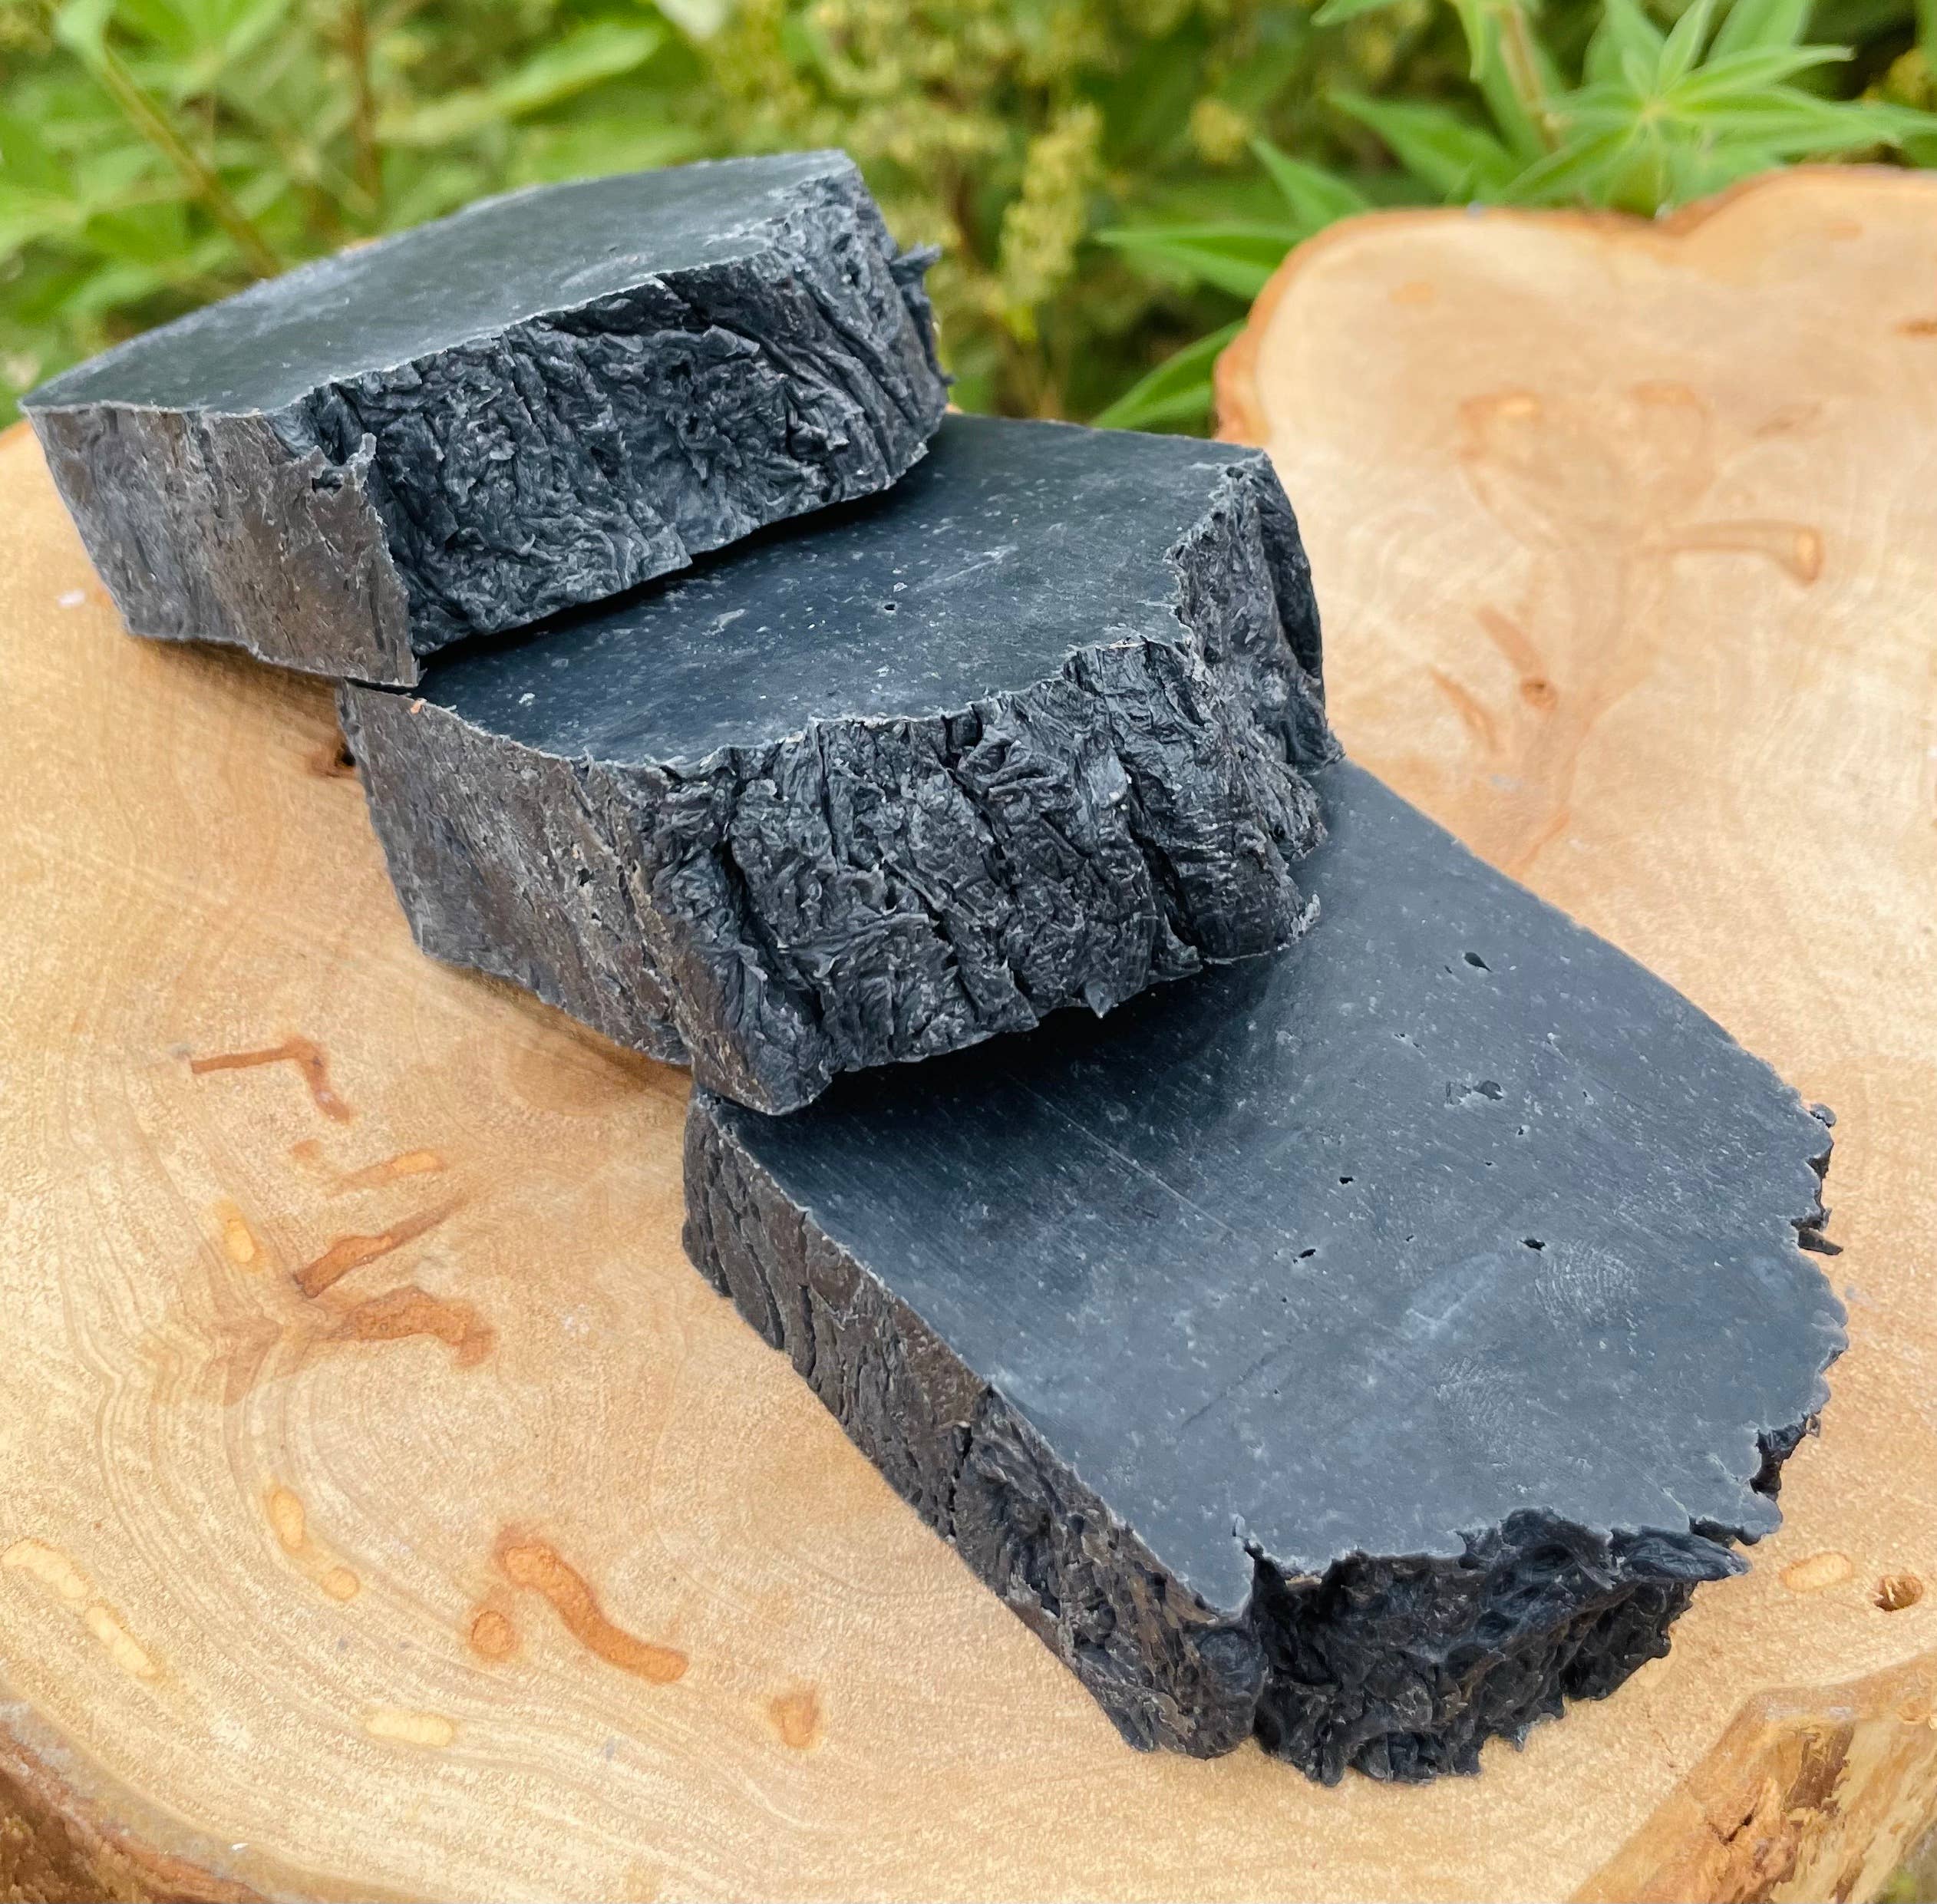 West Texas Soap Co. - Activated Charcoal Soap